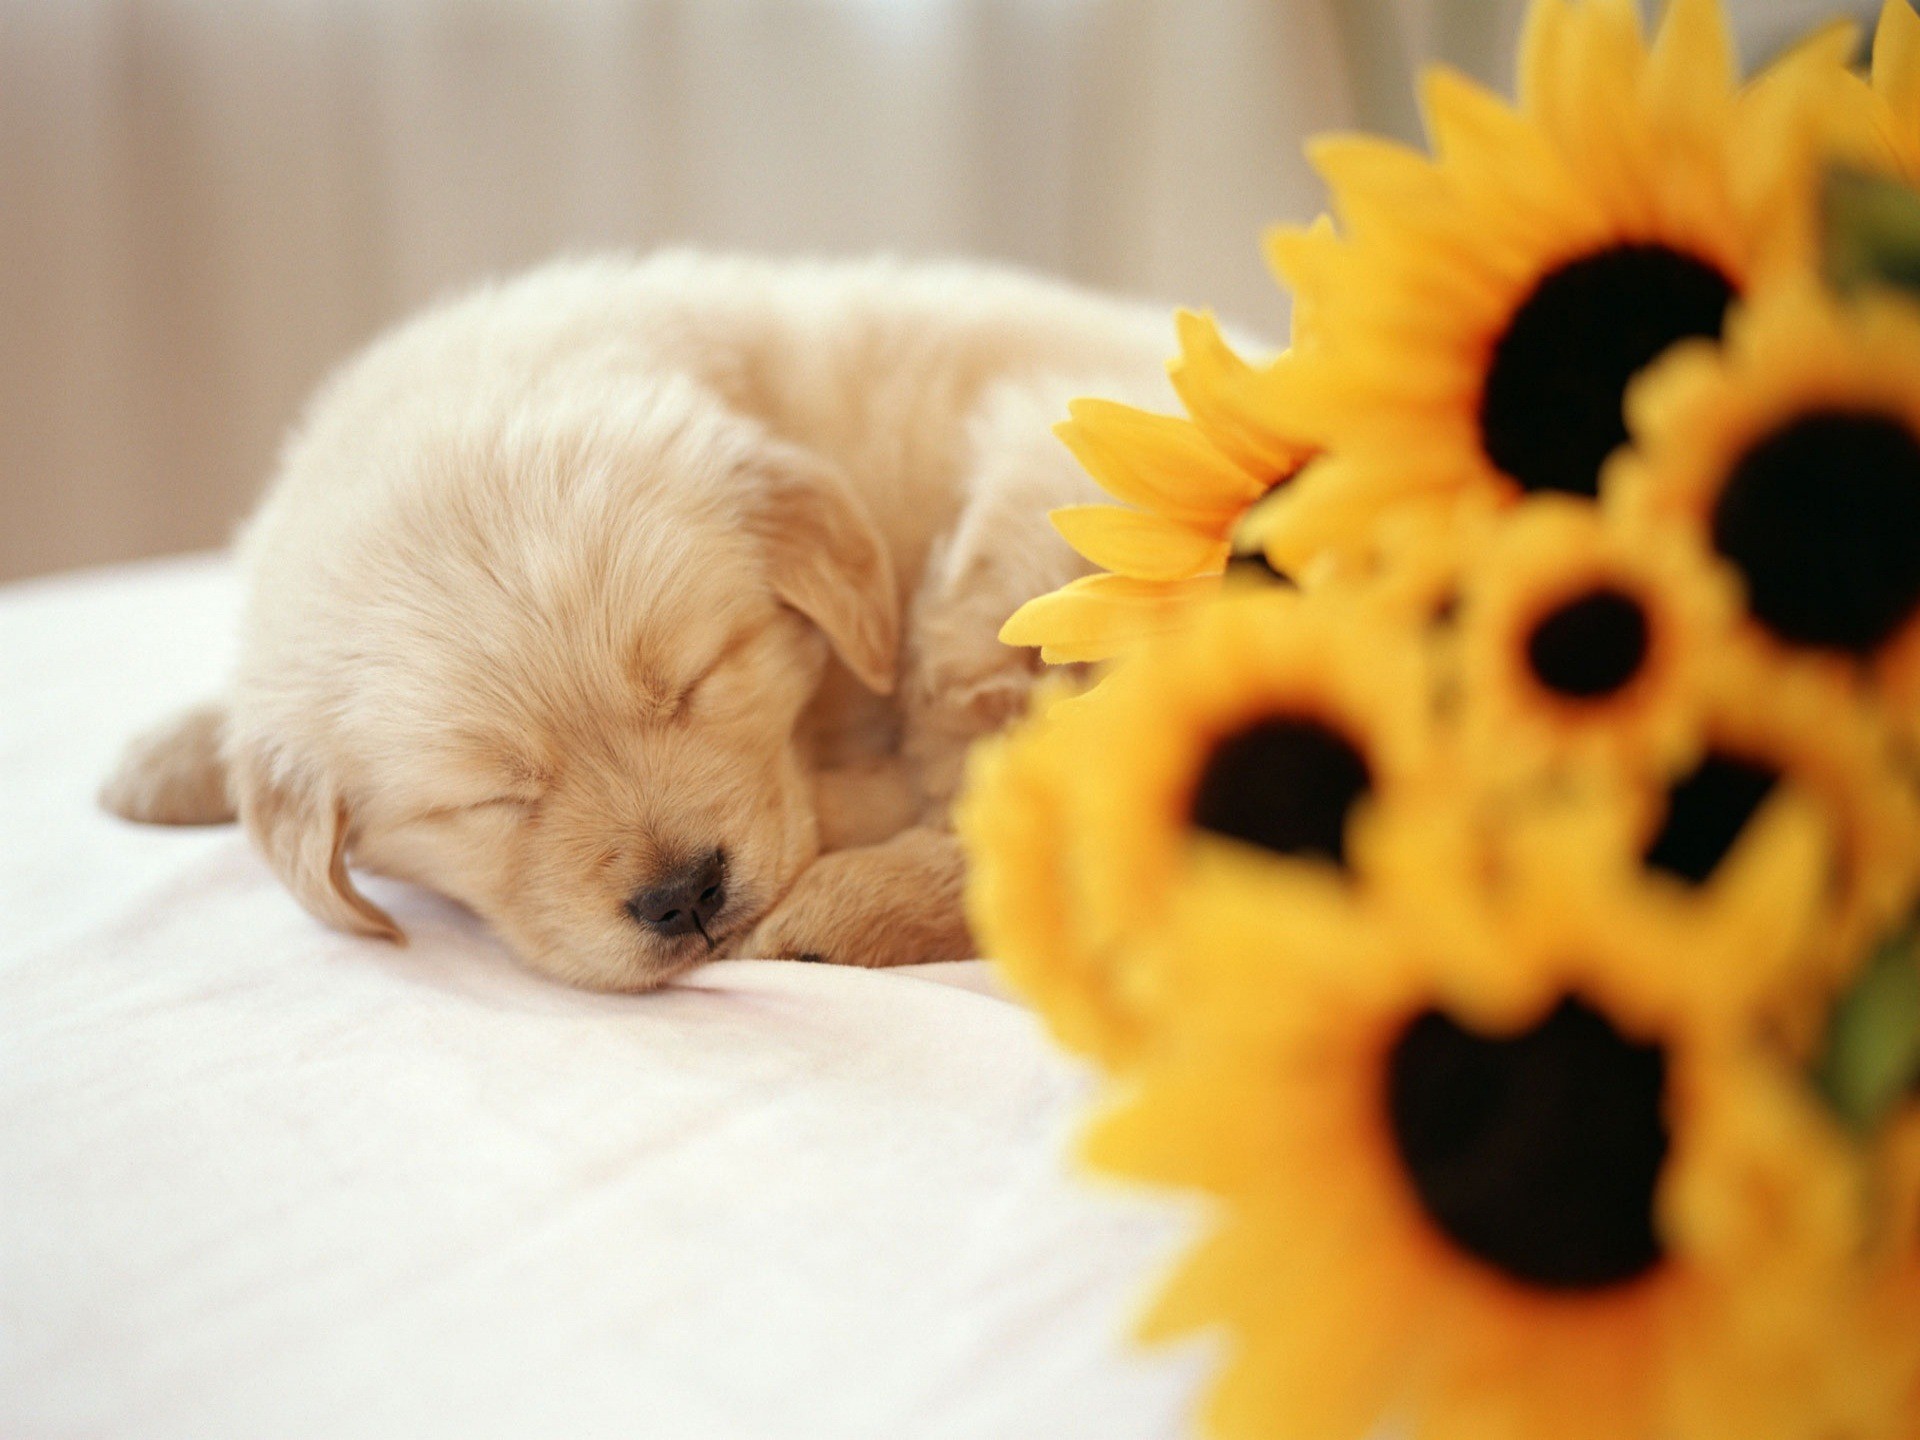 1920x1440 Sleeping Puppy Wallpaper Dogs Animals Wallpapers